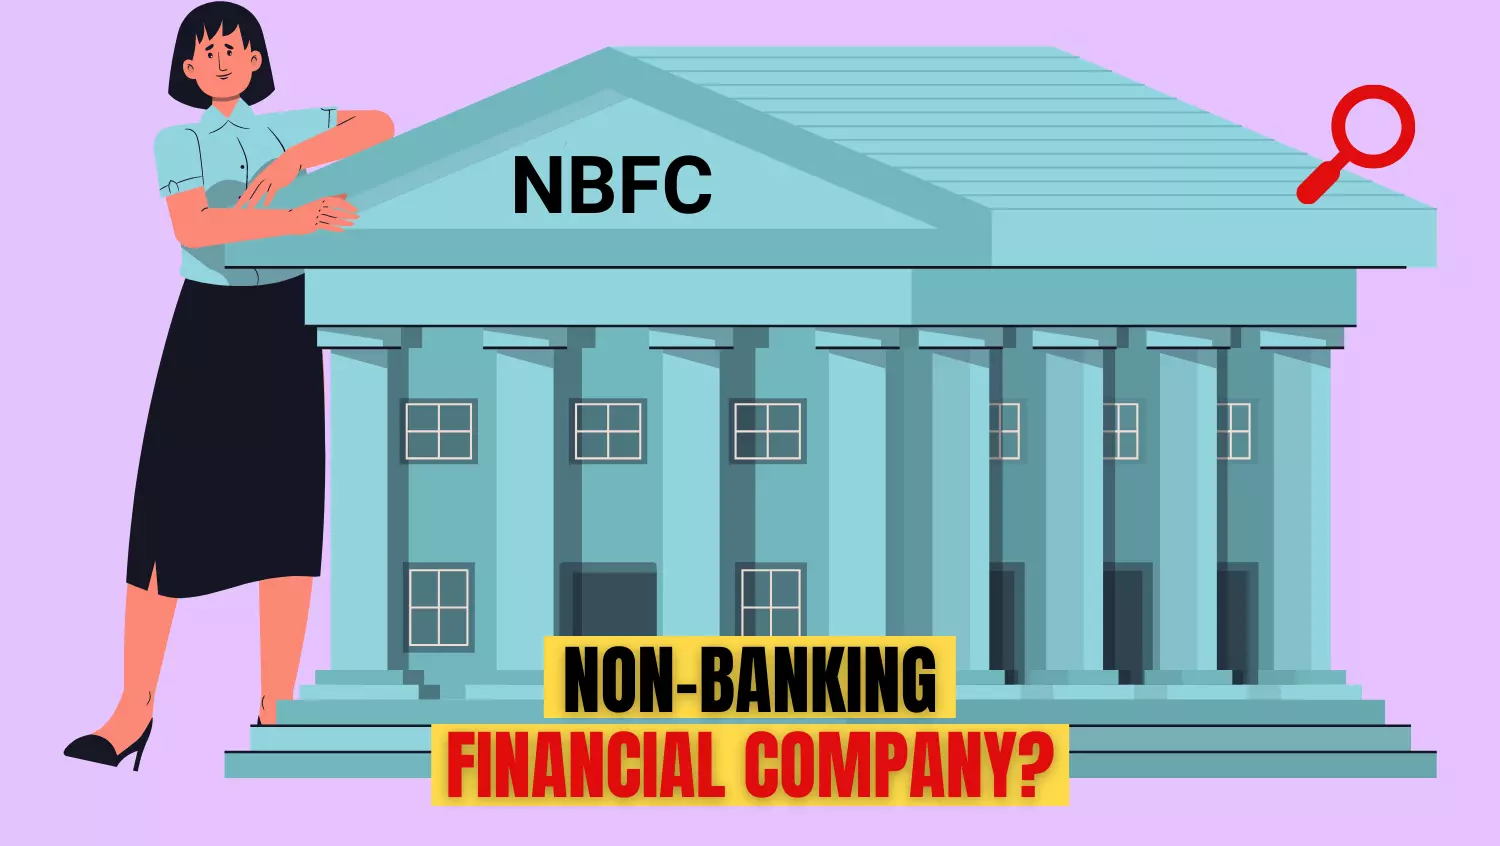 What is NBFC (Non-Banking Financial Company)? What are the differences between Bank and NBFC?